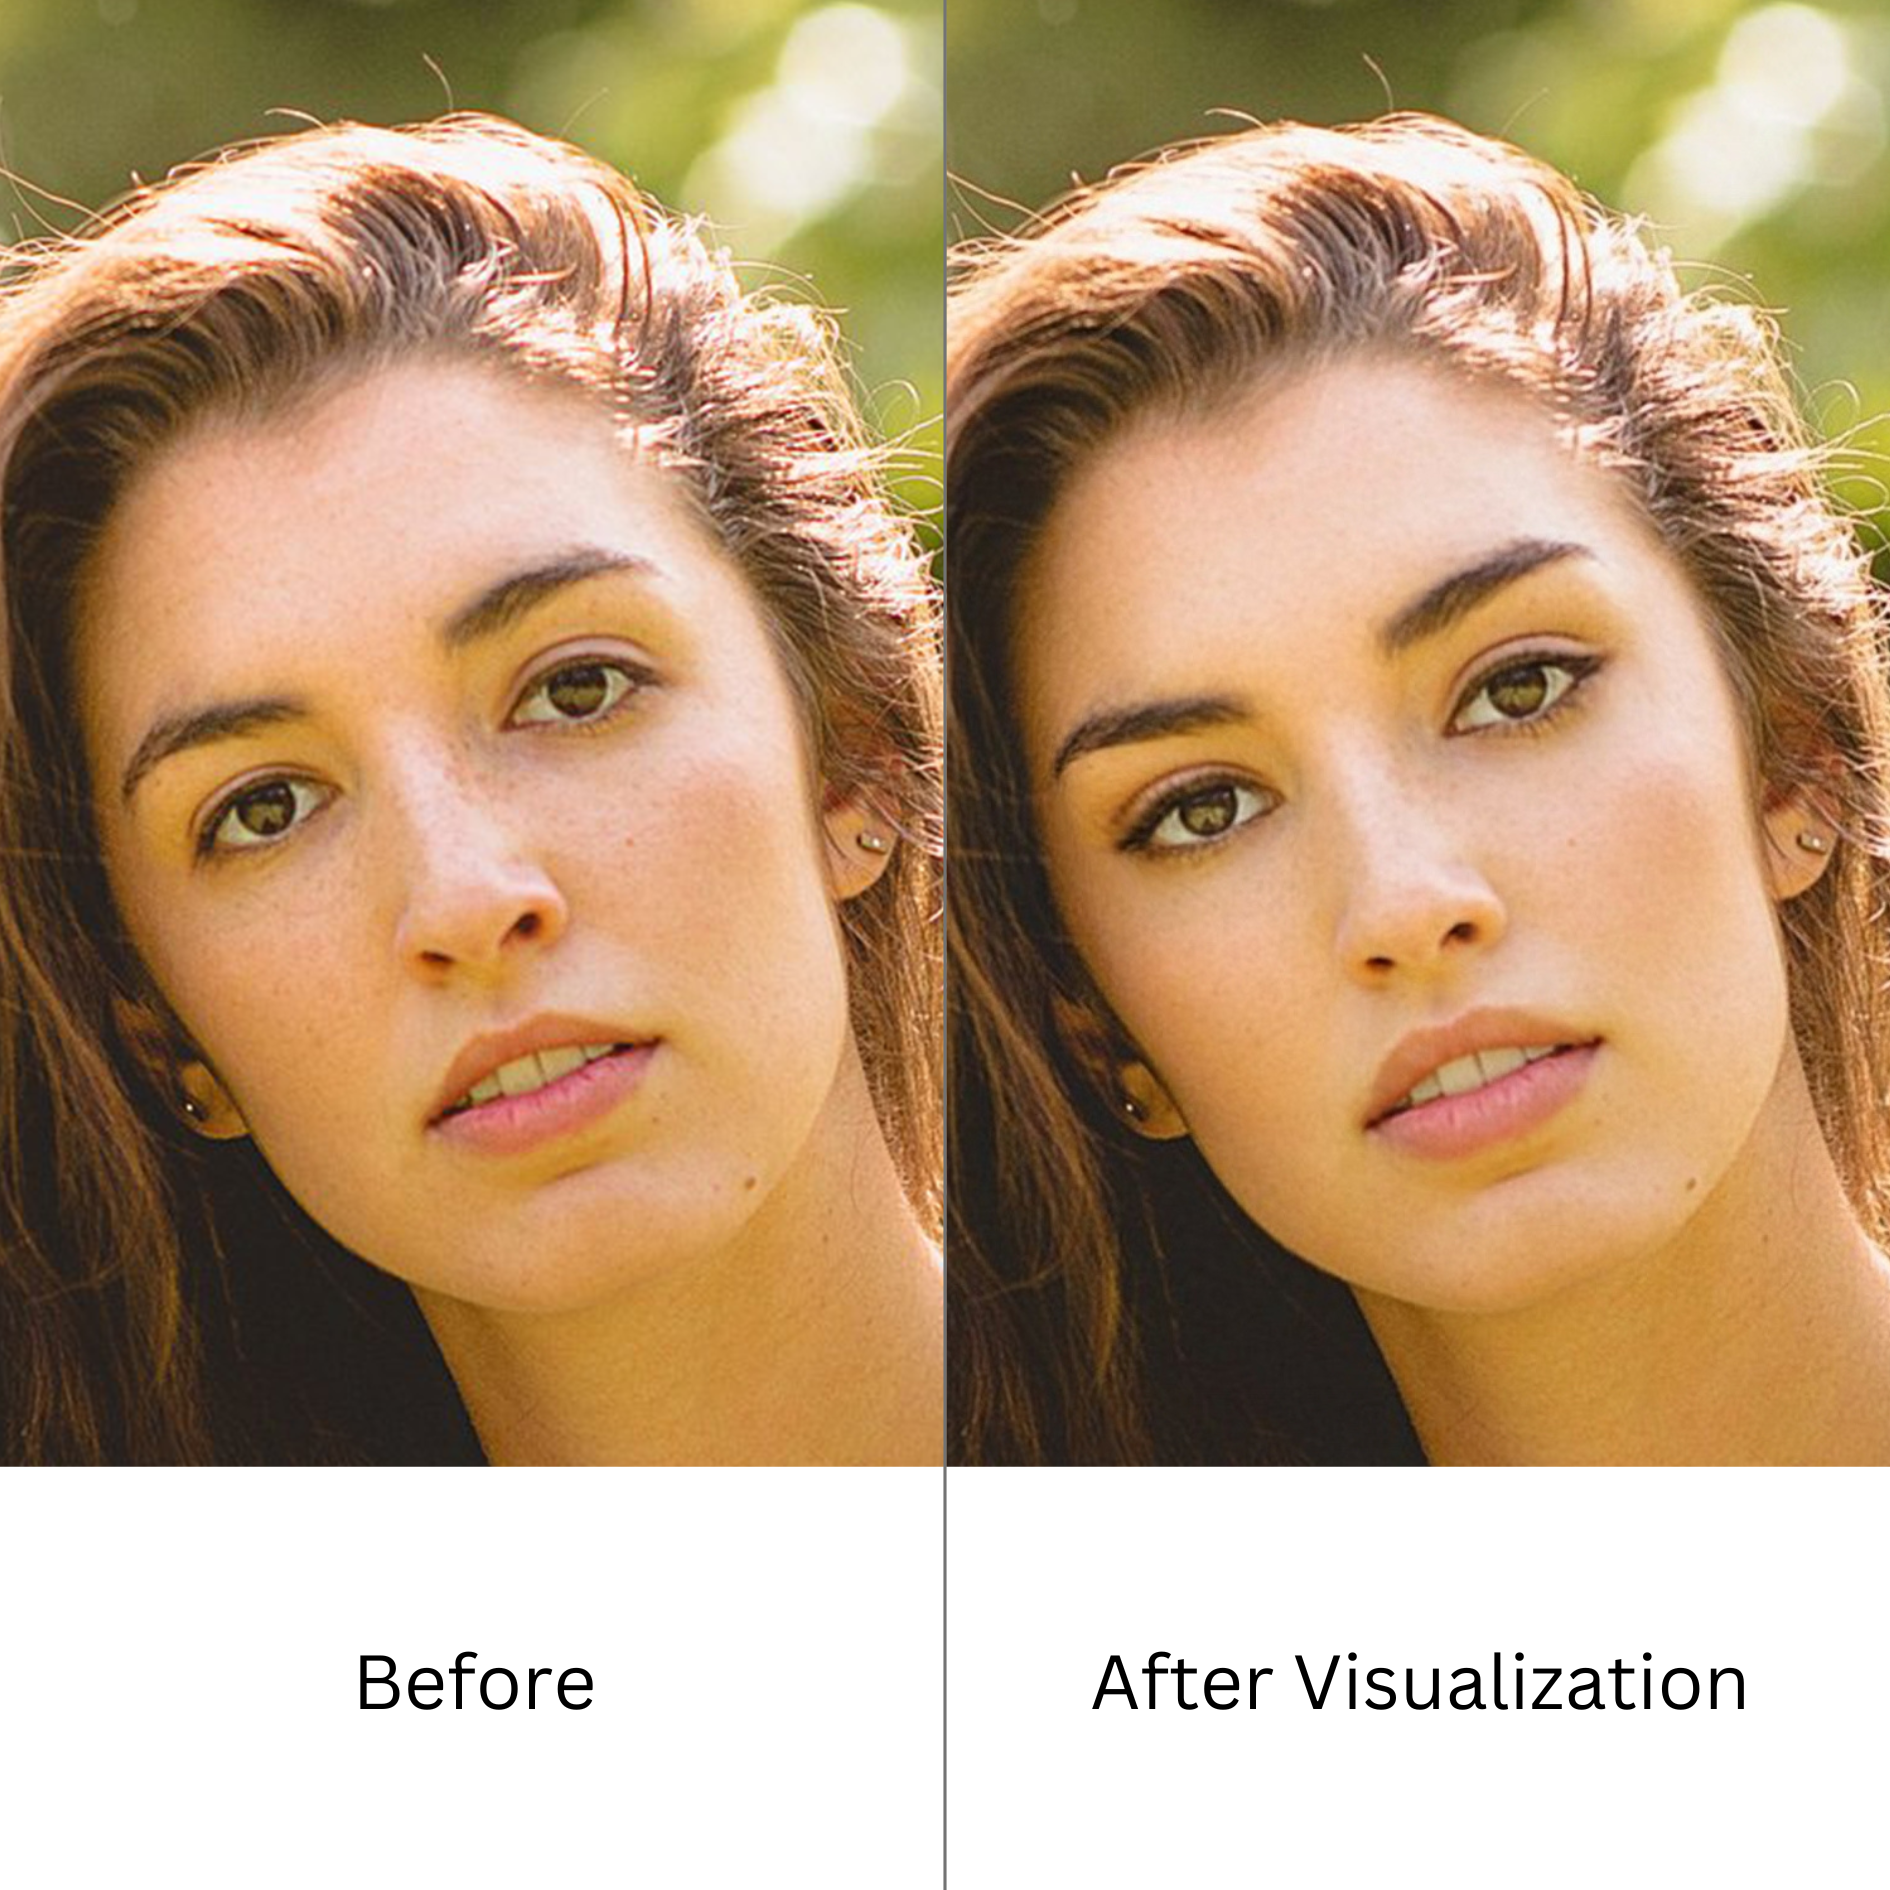 Plastic Surgery Visualization Before and After Photo - Premium Service